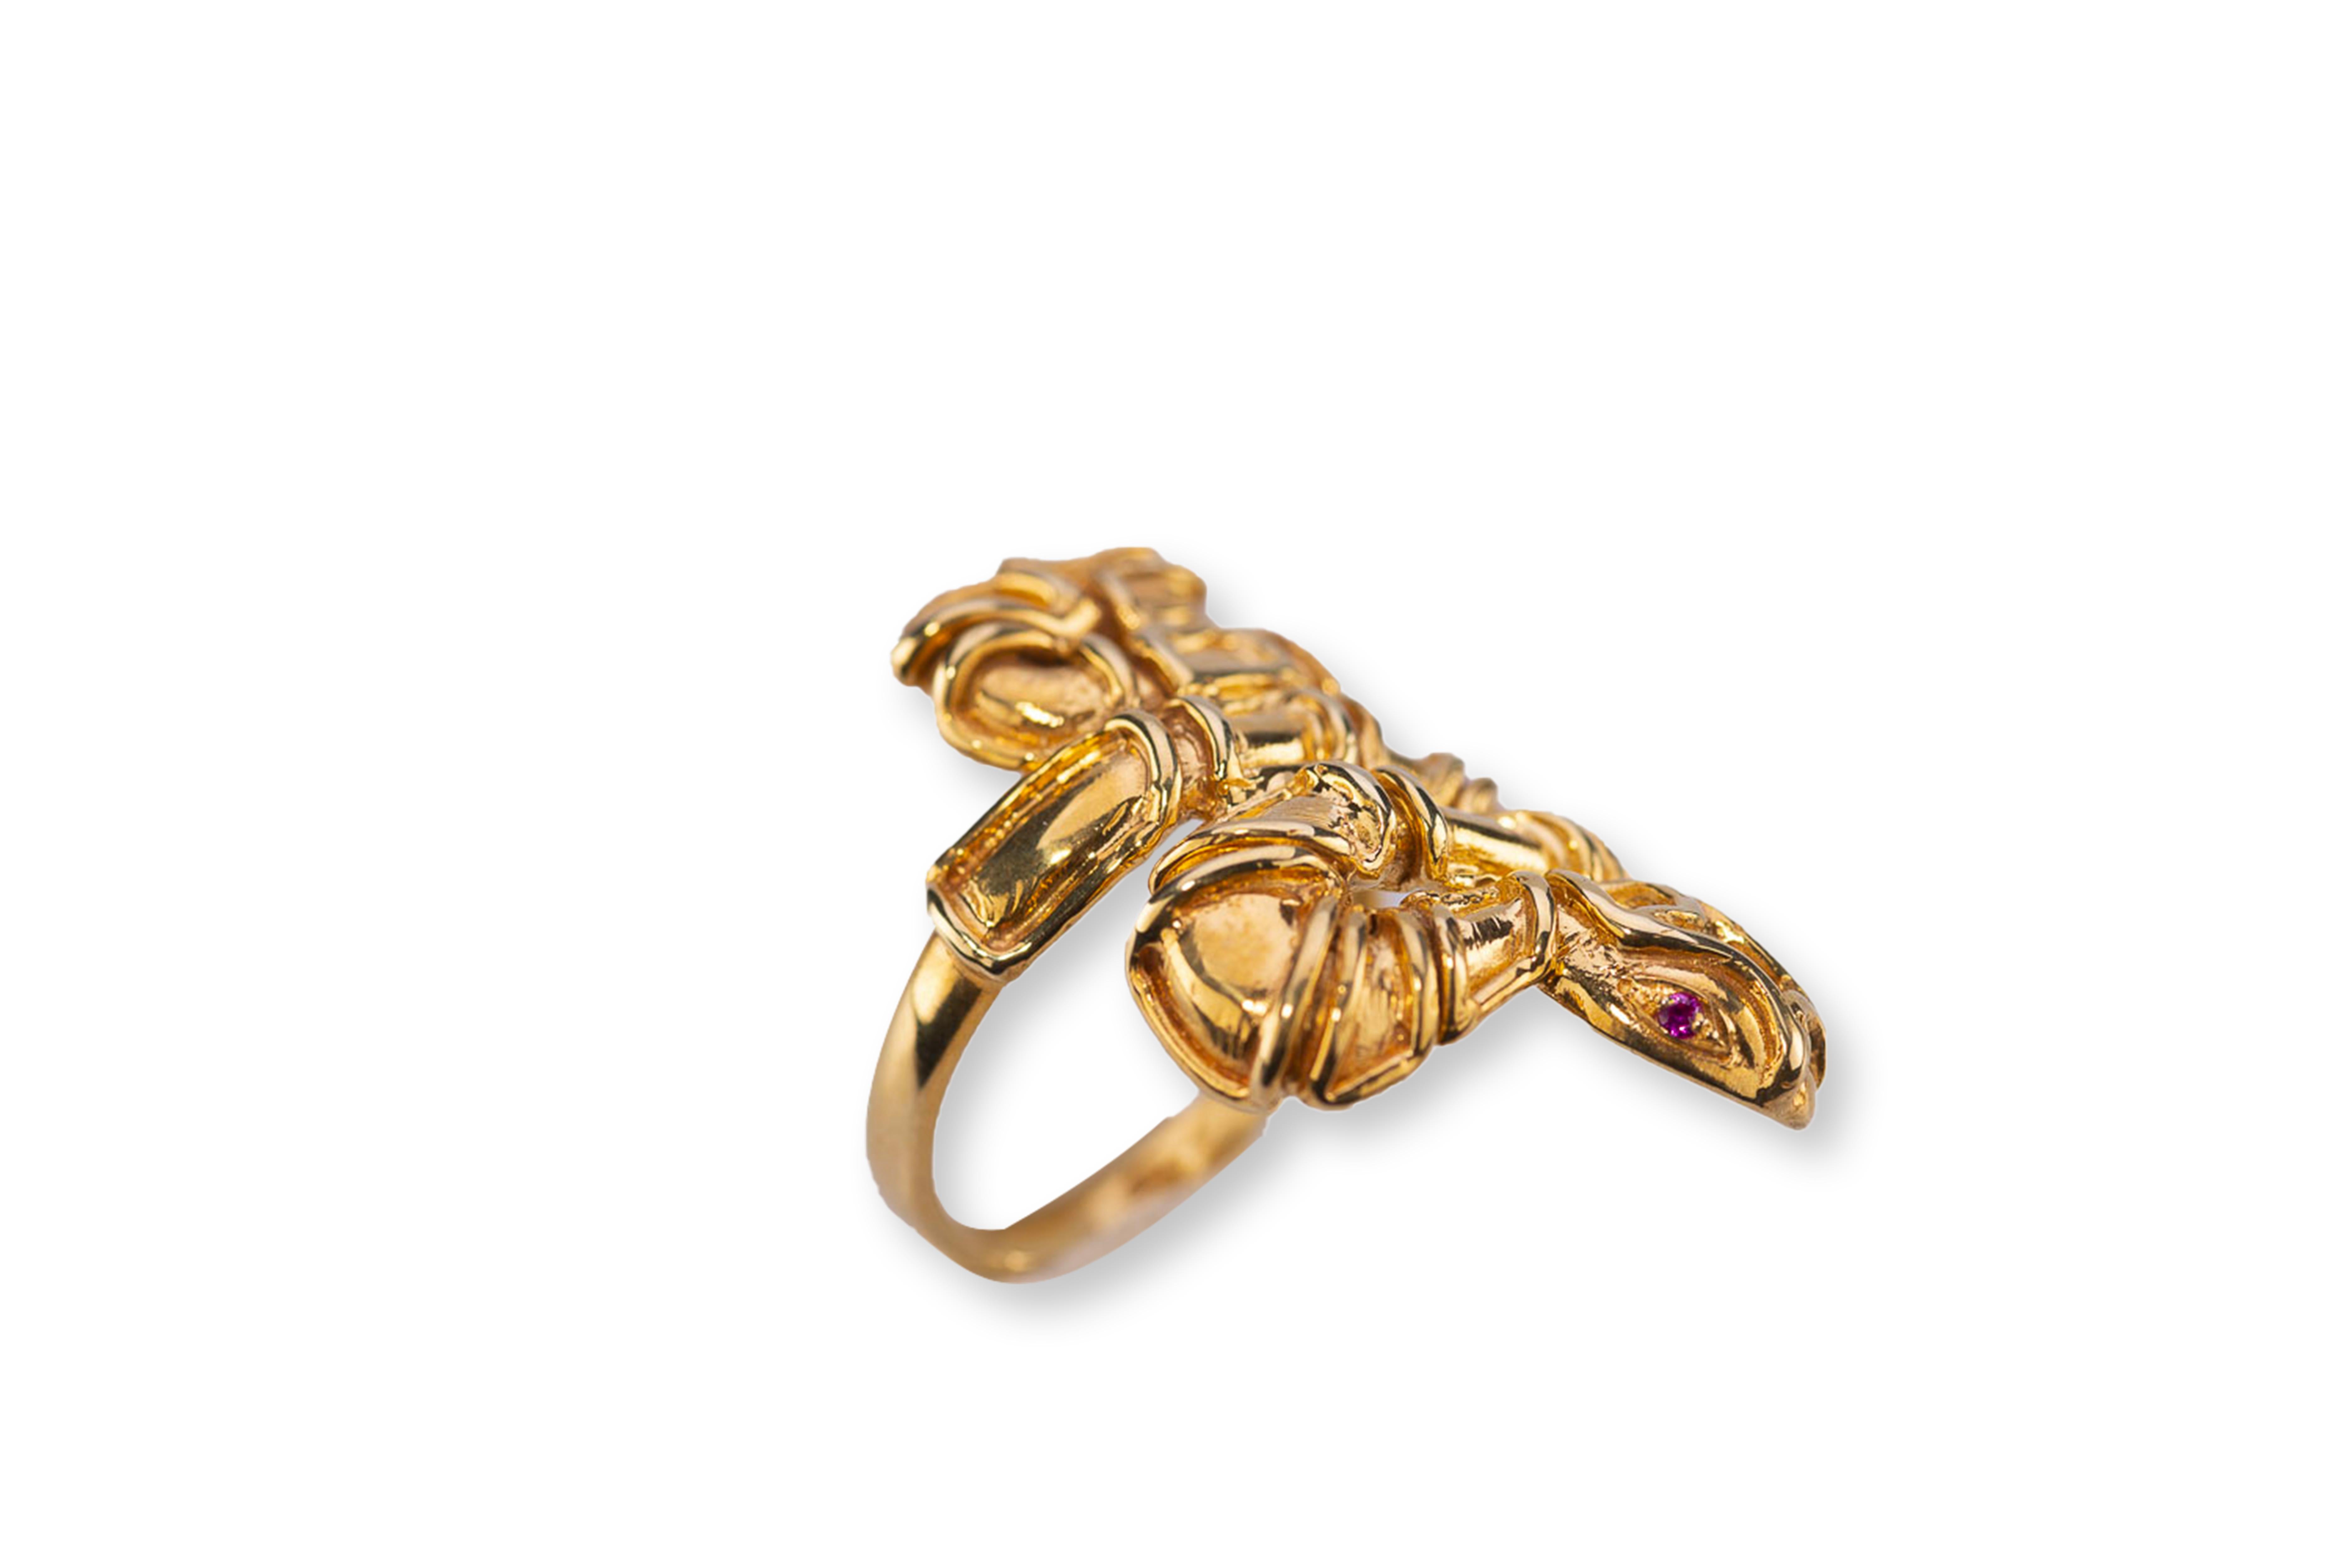 Delve into the captivating world of Rossella Ugolini, where artistry meets craftsmanship. Behold the handcrafted and hammered snake ring, exquisitely plated in Silver Sterling 24 Karats Yellow Gold with Rubies Eyes, delicately sized at 6.5 Usa size